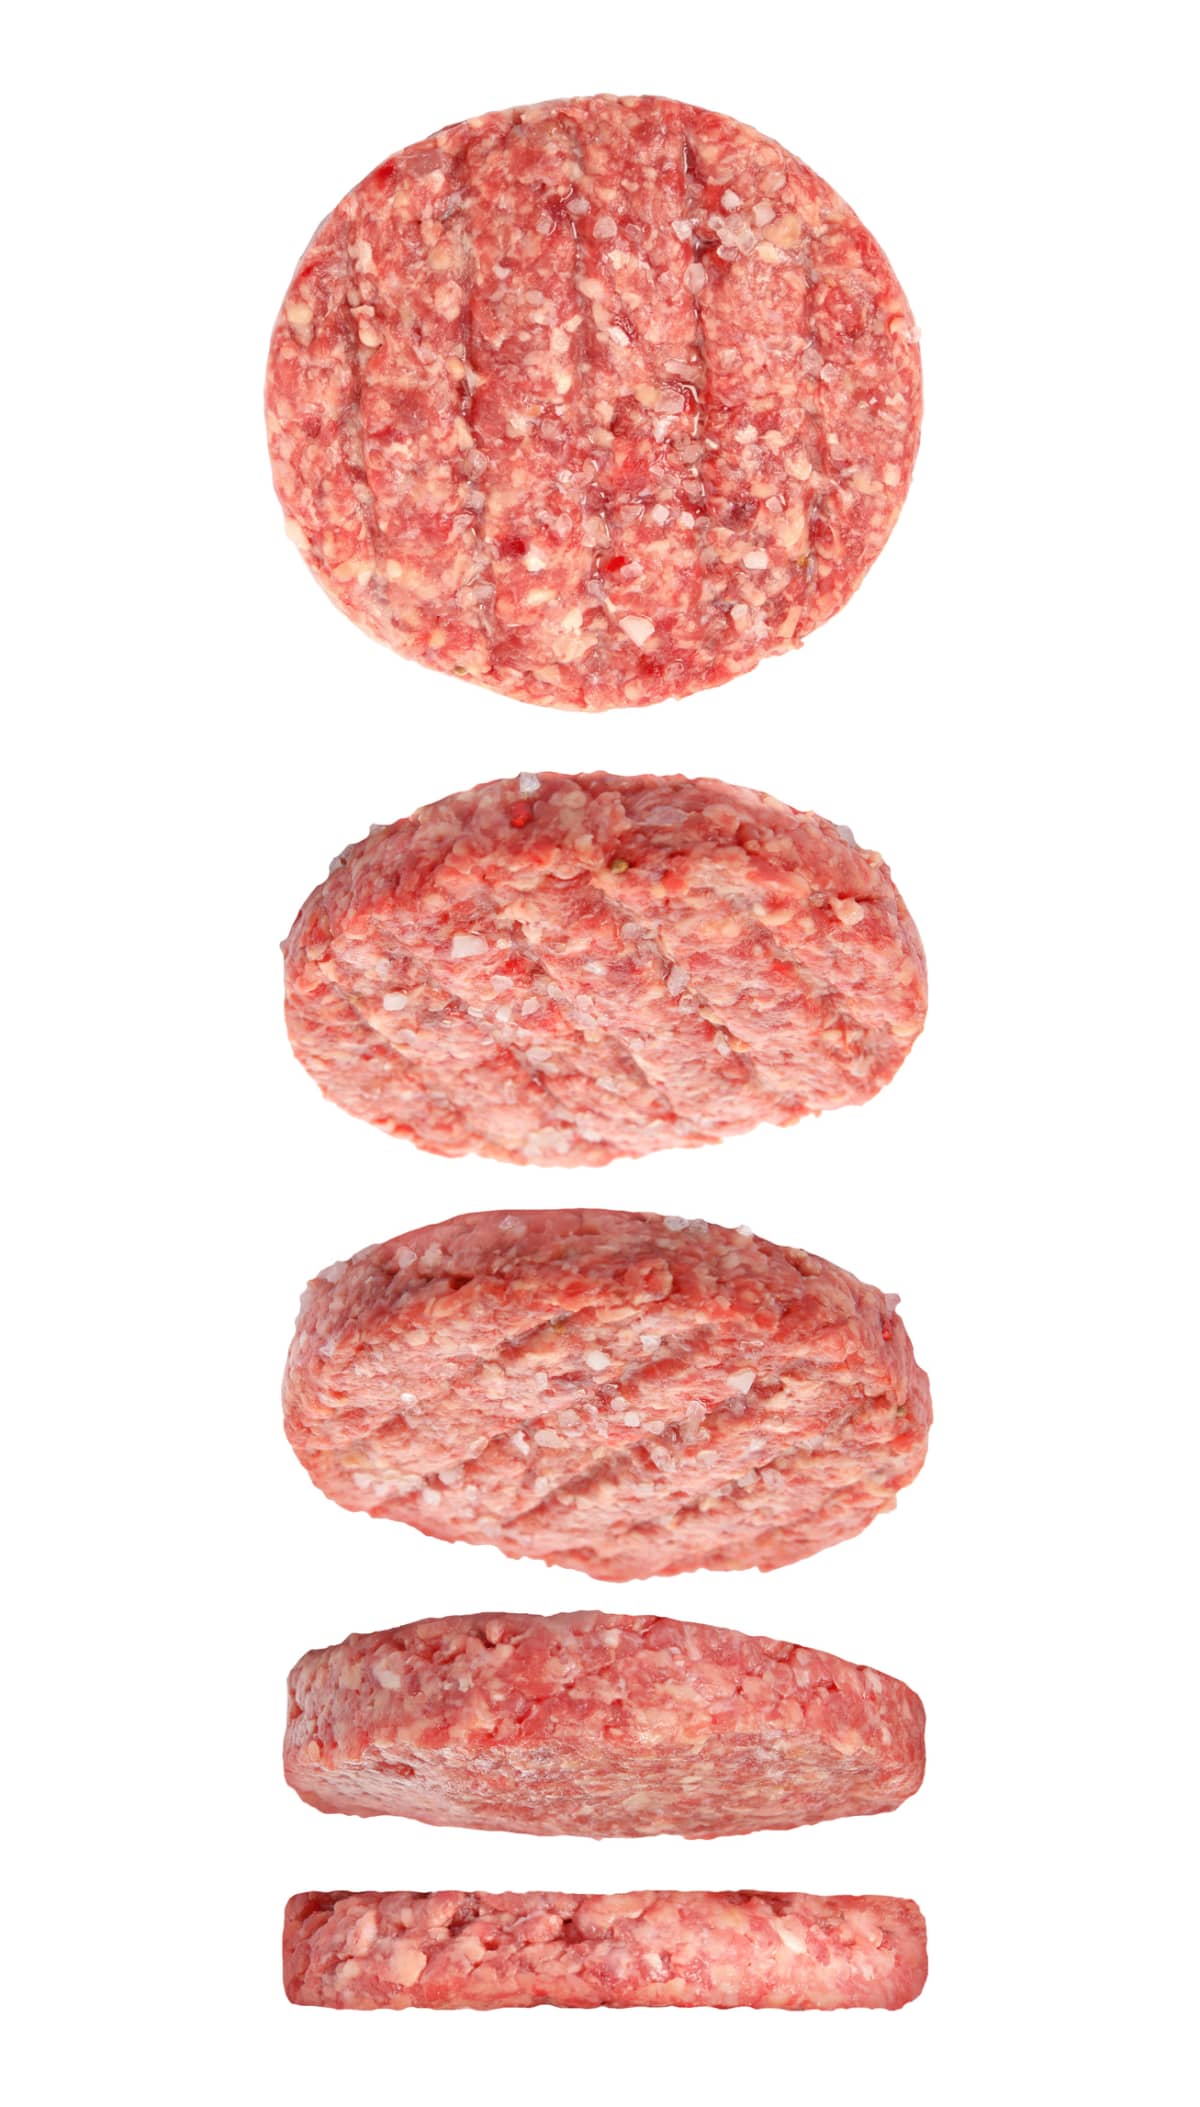 Burger patties on a white background. 